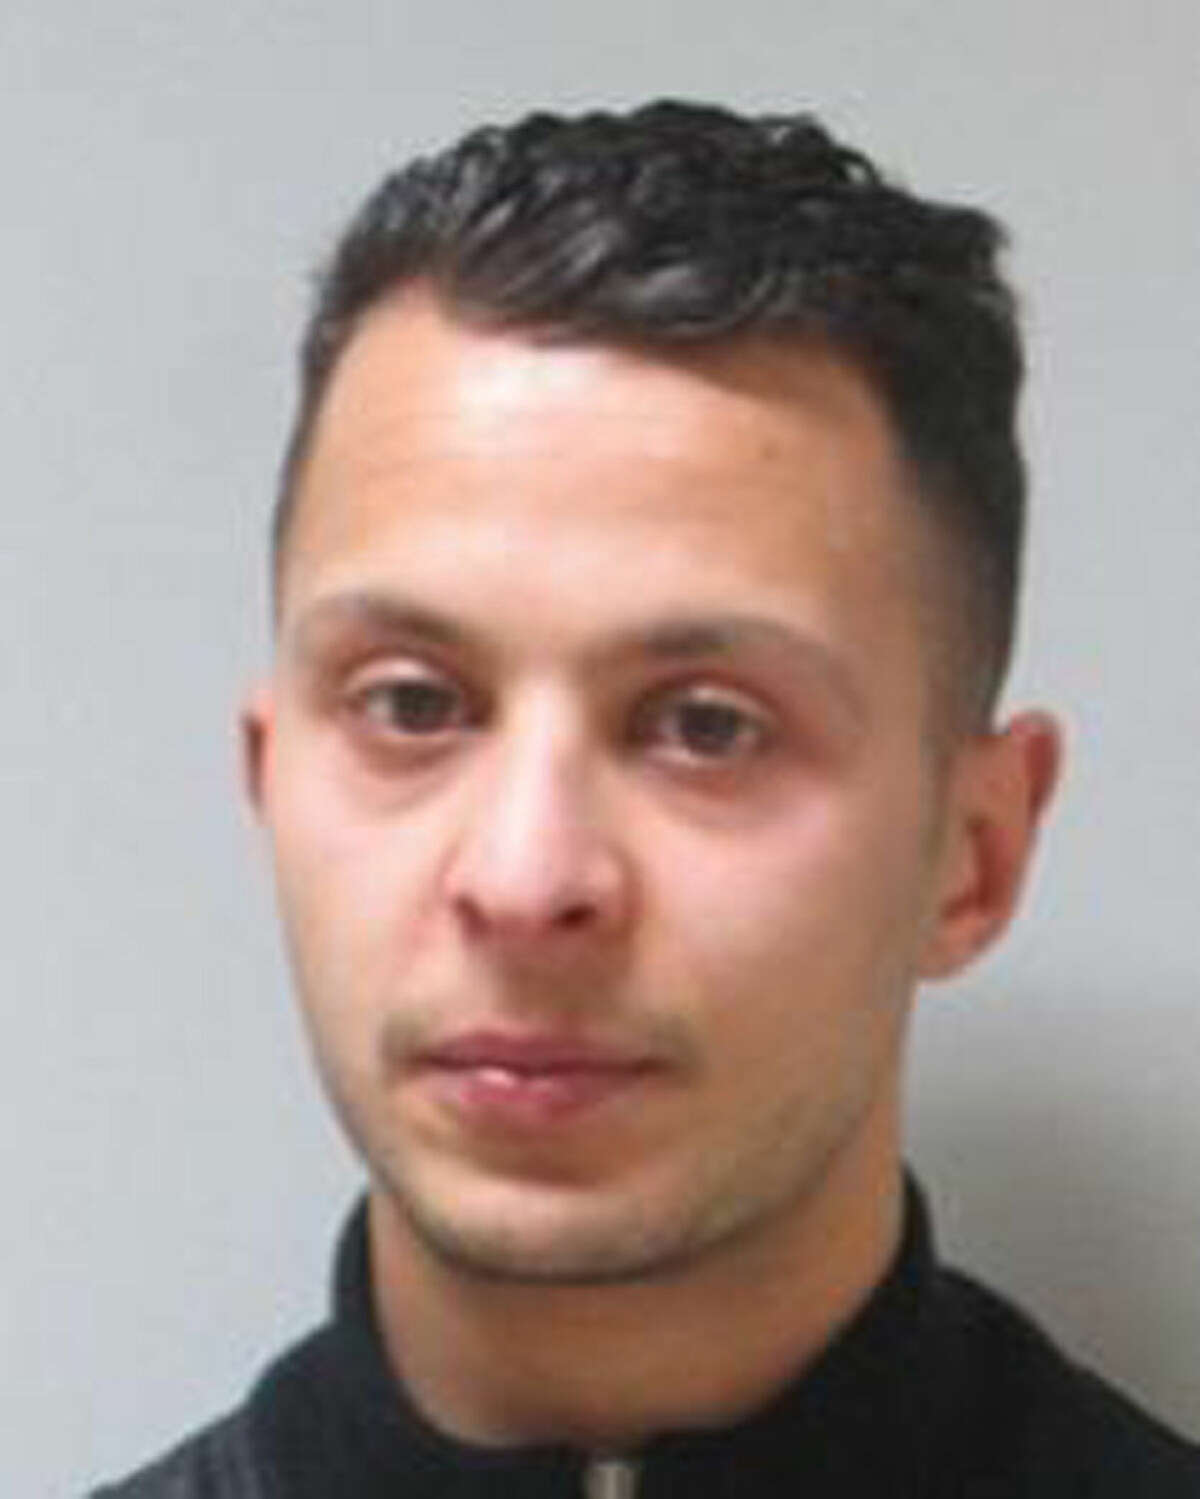 This undated file photo provided by the Belgian Federal Police shows 26-year old Salah Abdeslam, who is wanted by police in connection with recent terror attacks in Paris. Belgian prosecutors said Friday March 18, 2016 that fingerprints of Paris attacks fugitive Salah Abdeslam found in Brussels apartment that was raided earlier this week. (Belgian Federal Police via AP)